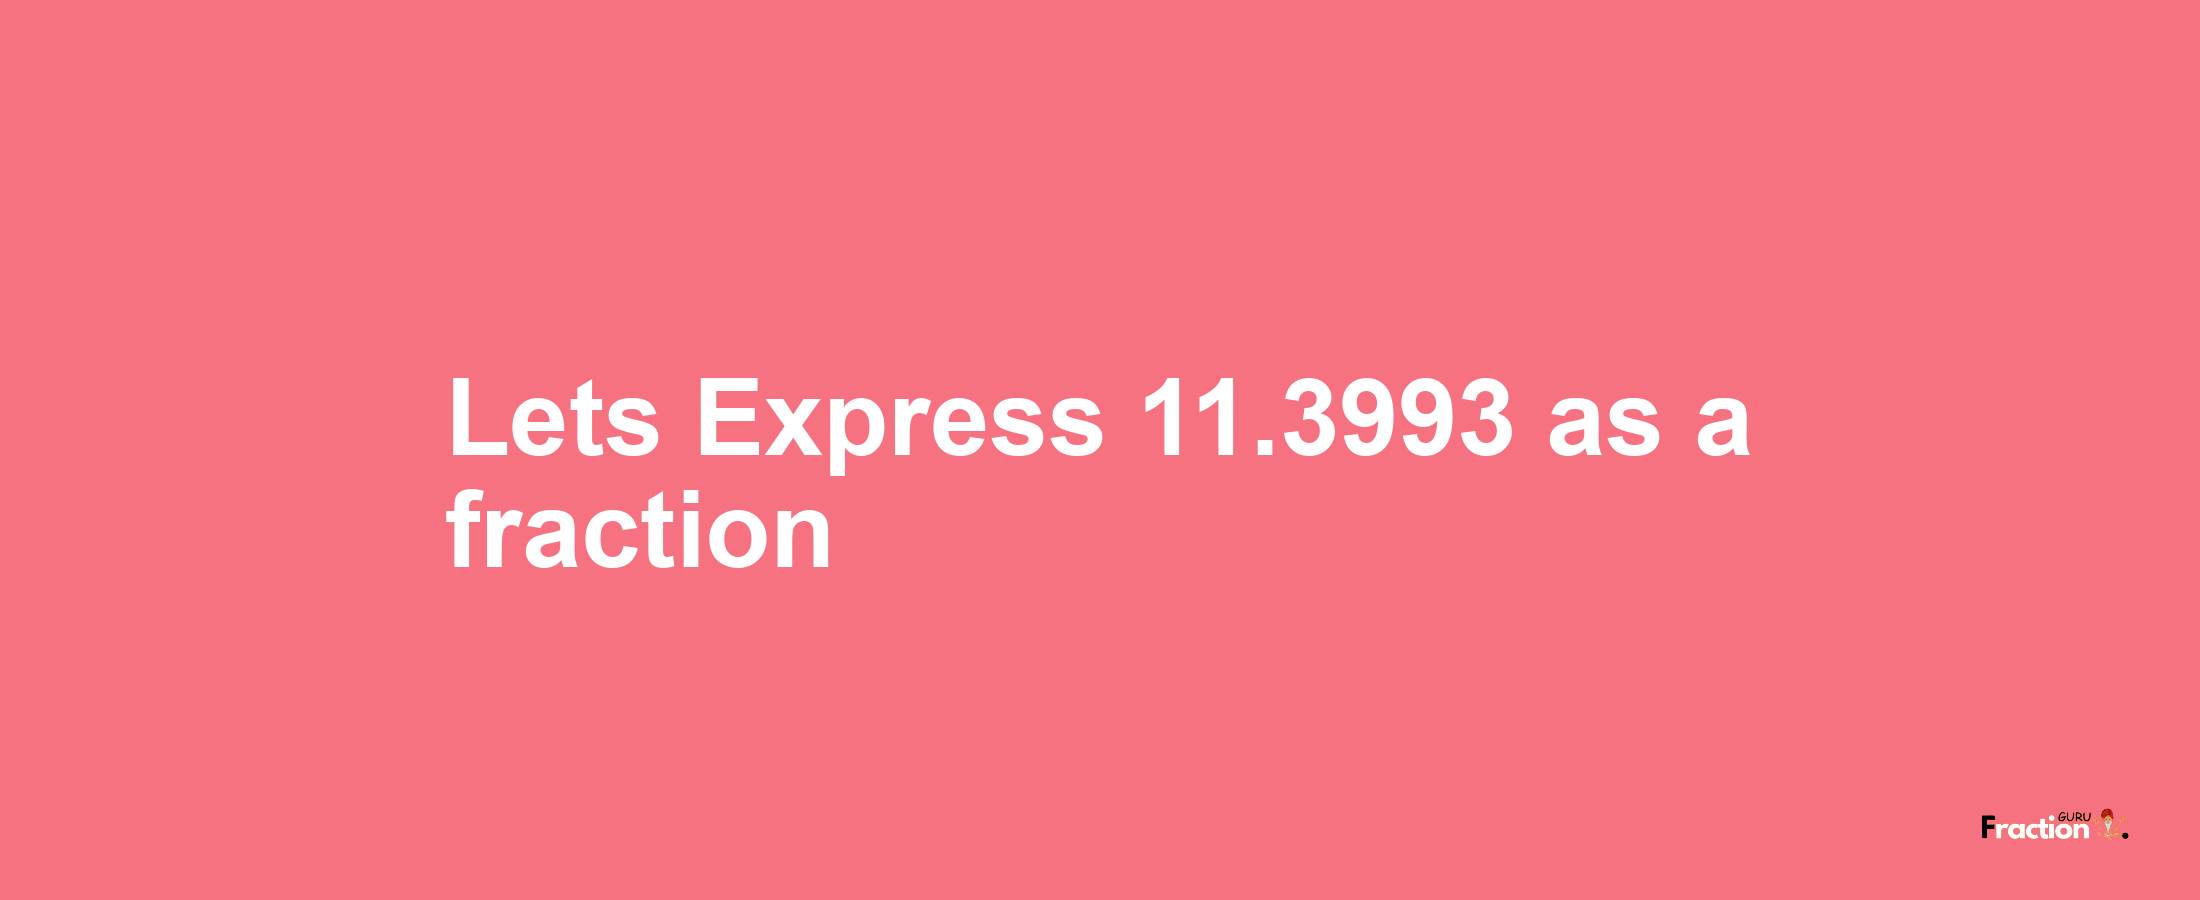 Lets Express 11.3993 as afraction